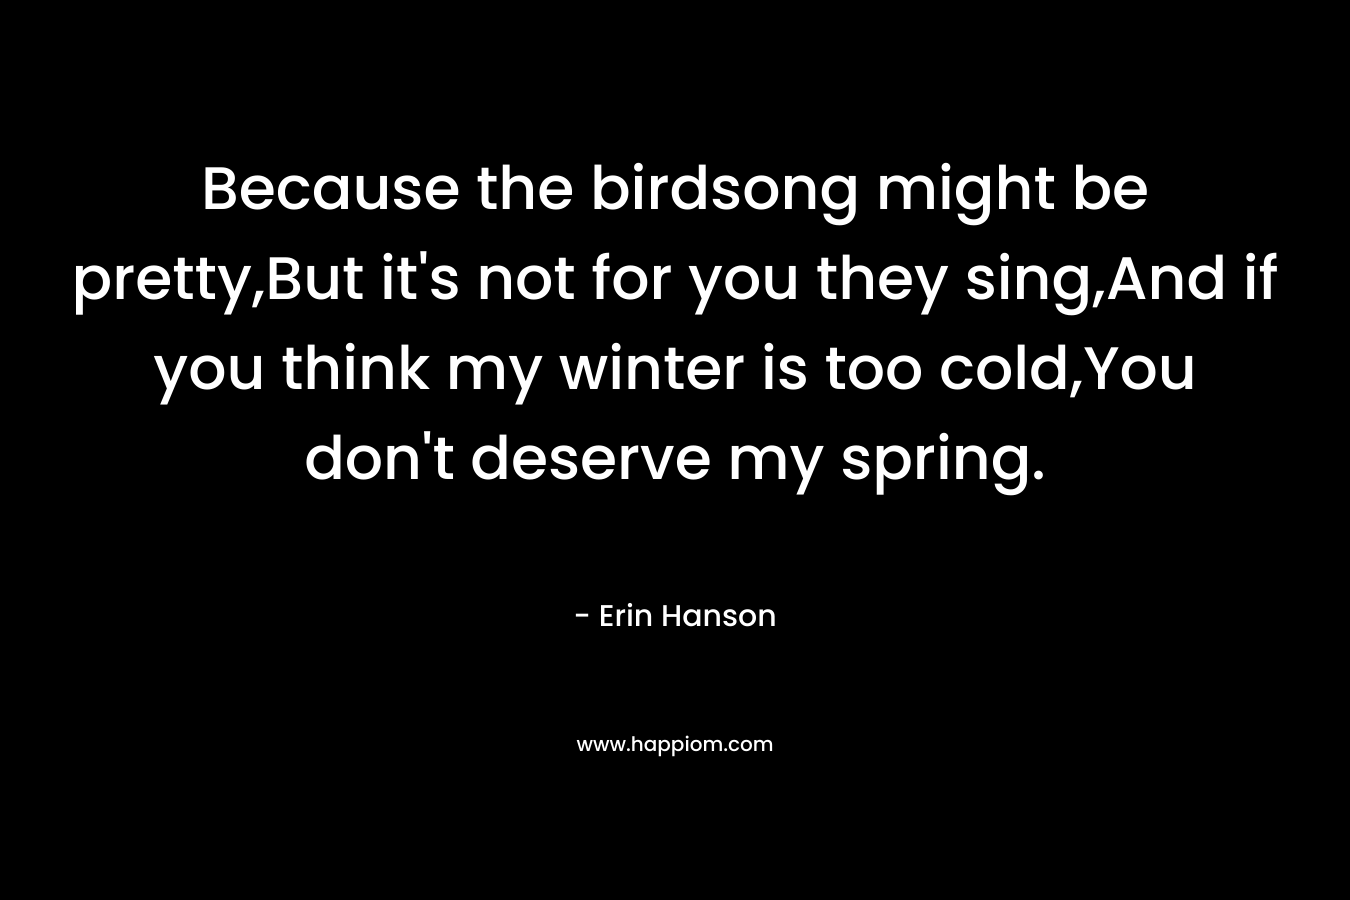 Because the birdsong might be pretty,But it’s not for you they sing,And if you think my winter is too cold,You don’t deserve my spring. – Erin Hanson